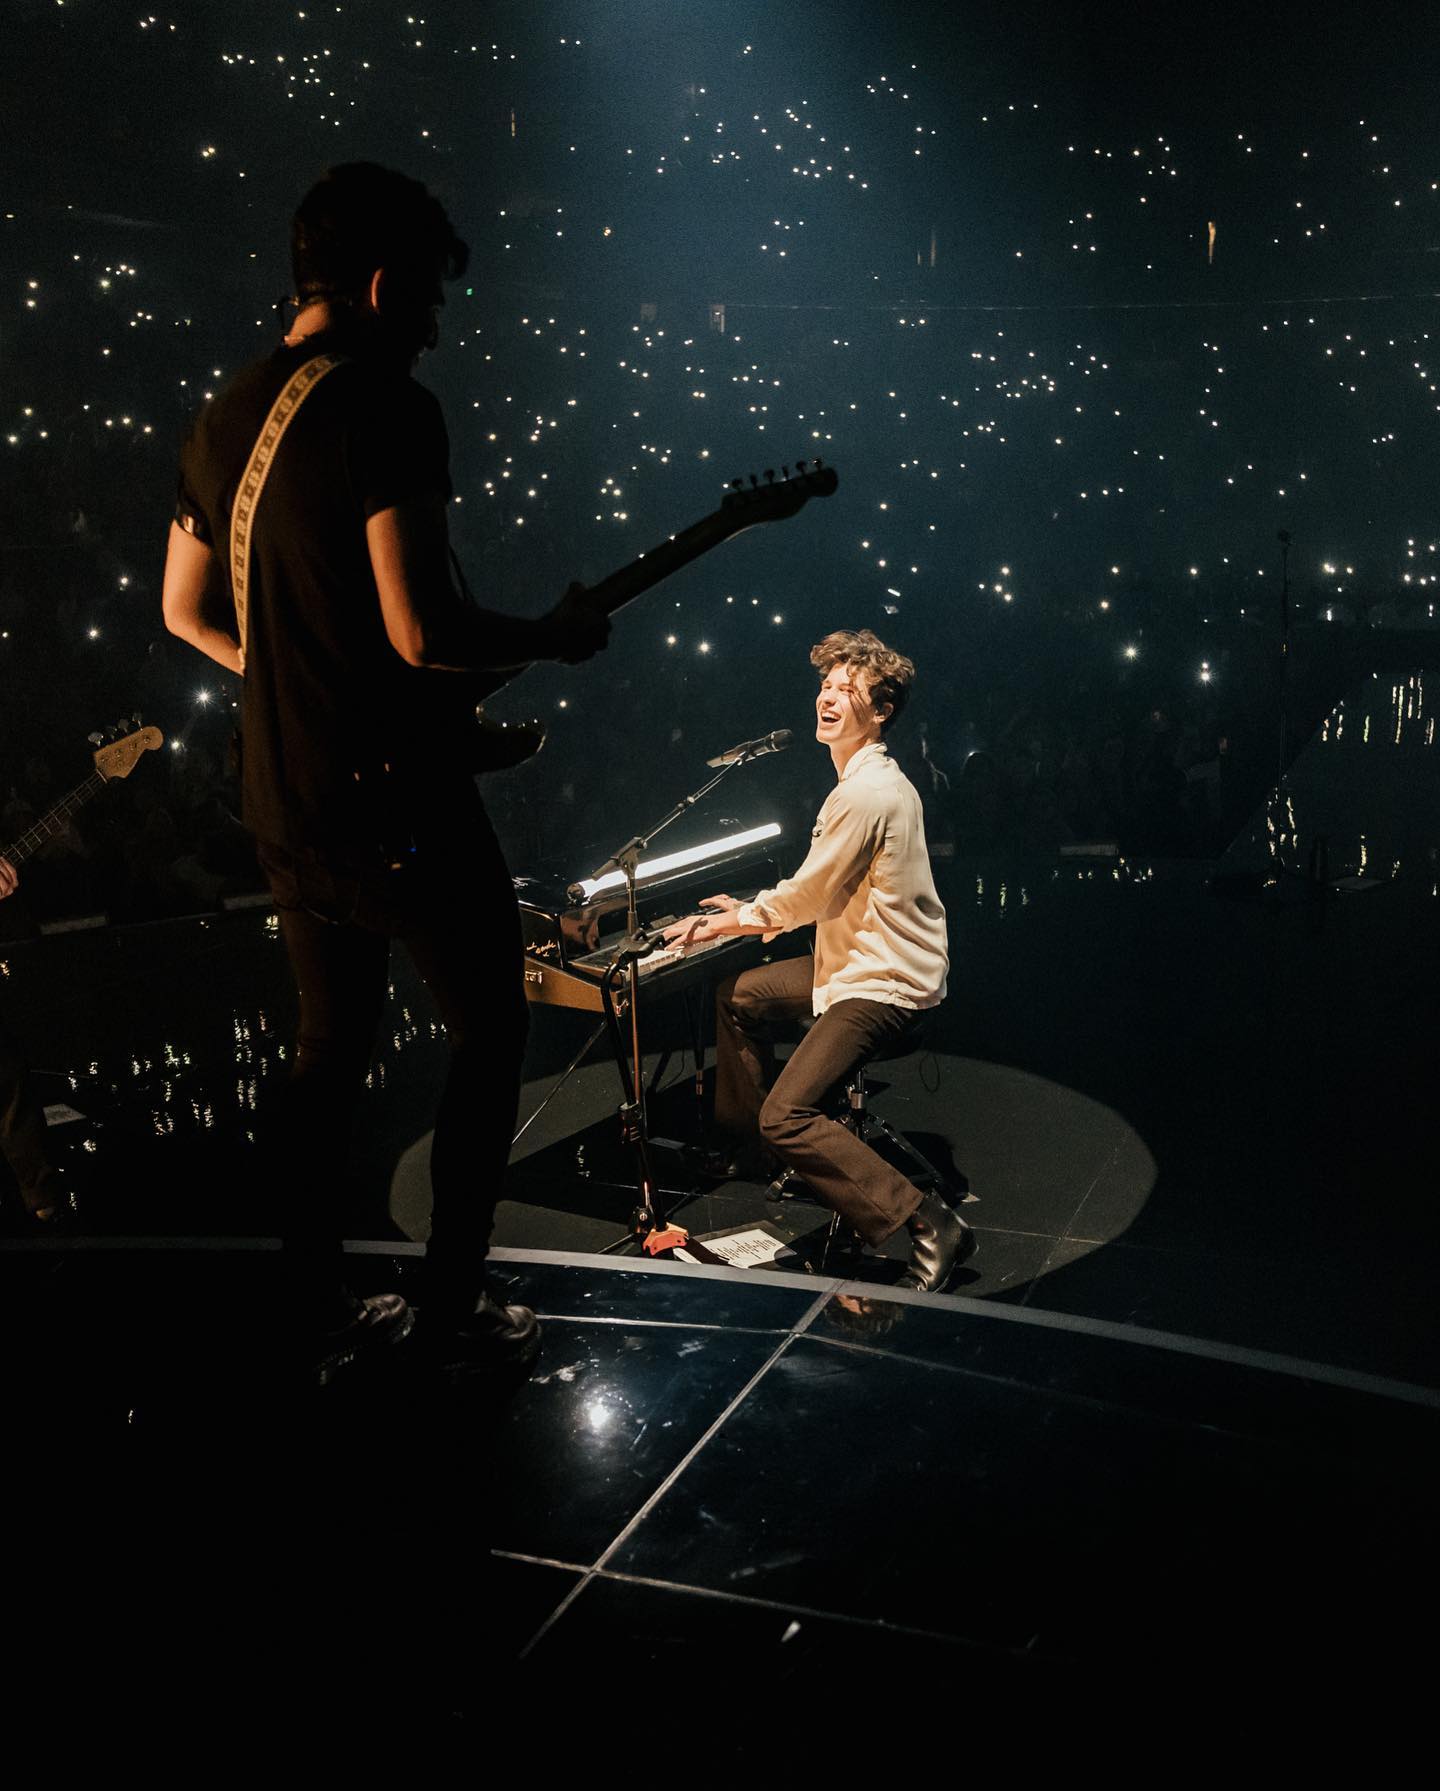 Why did singer Shawn Mendes cancel his world tour?